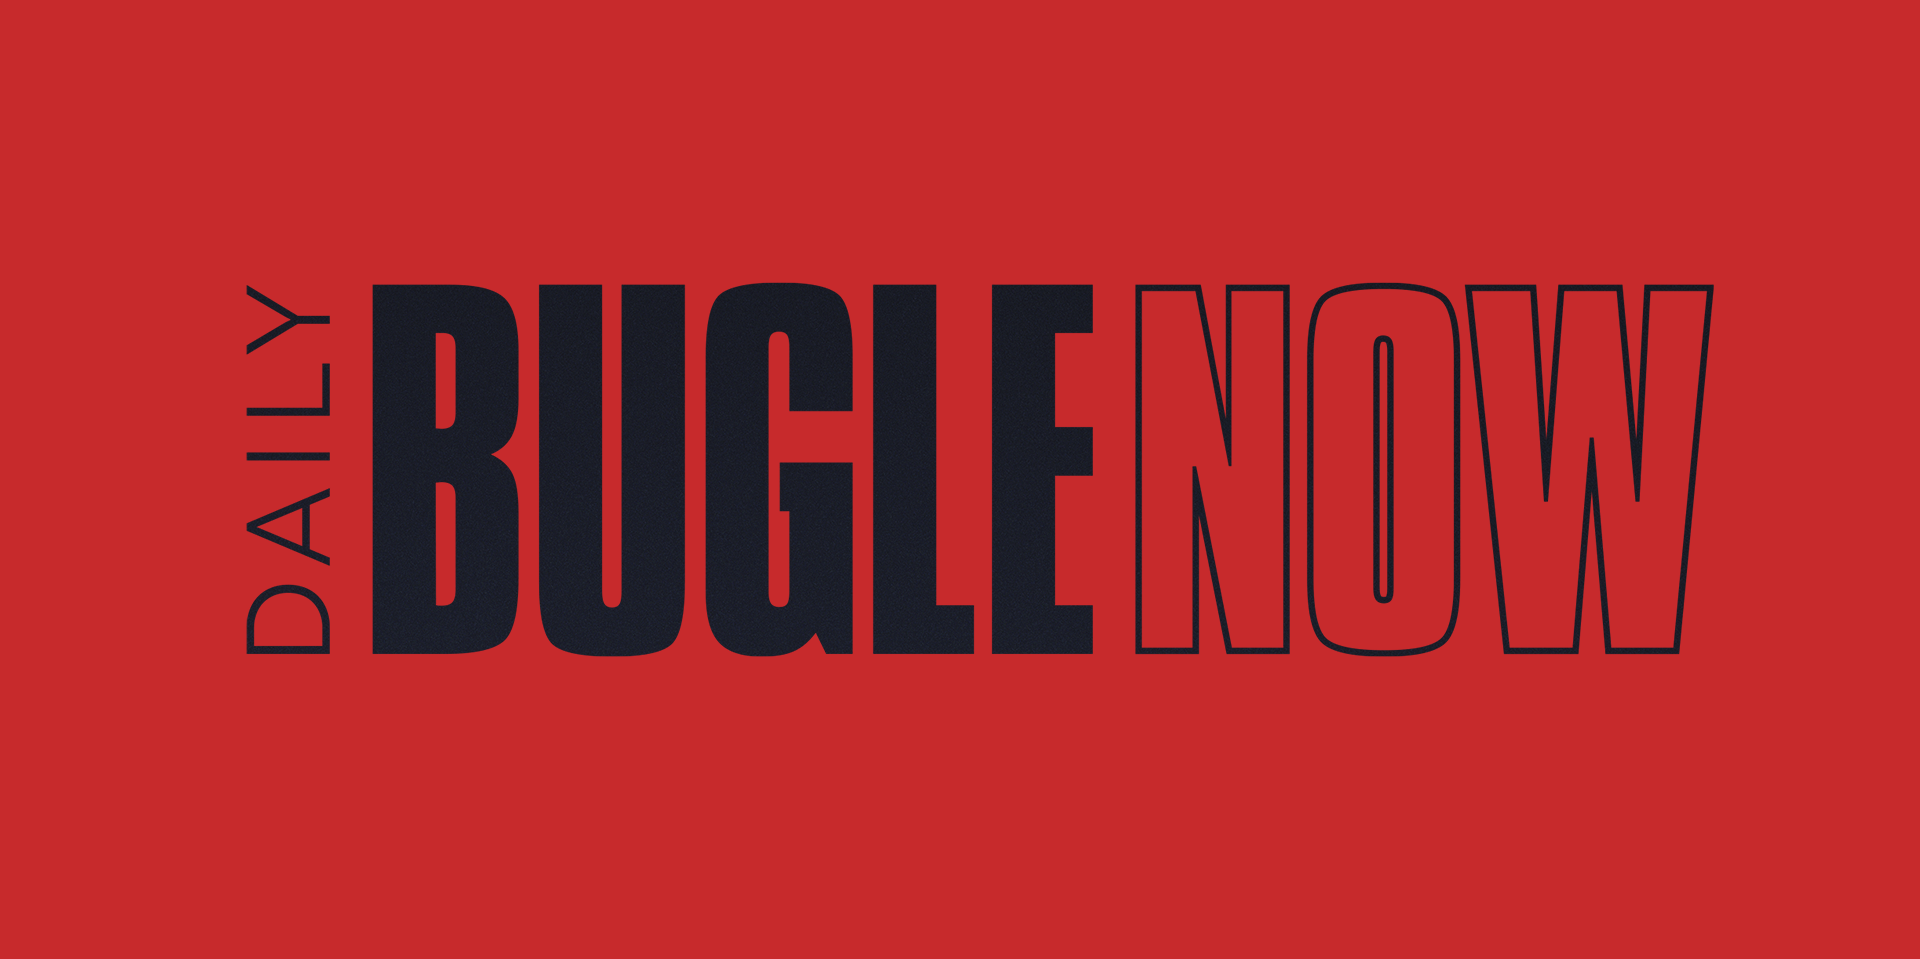 CTF Guide: The Daily Bugle